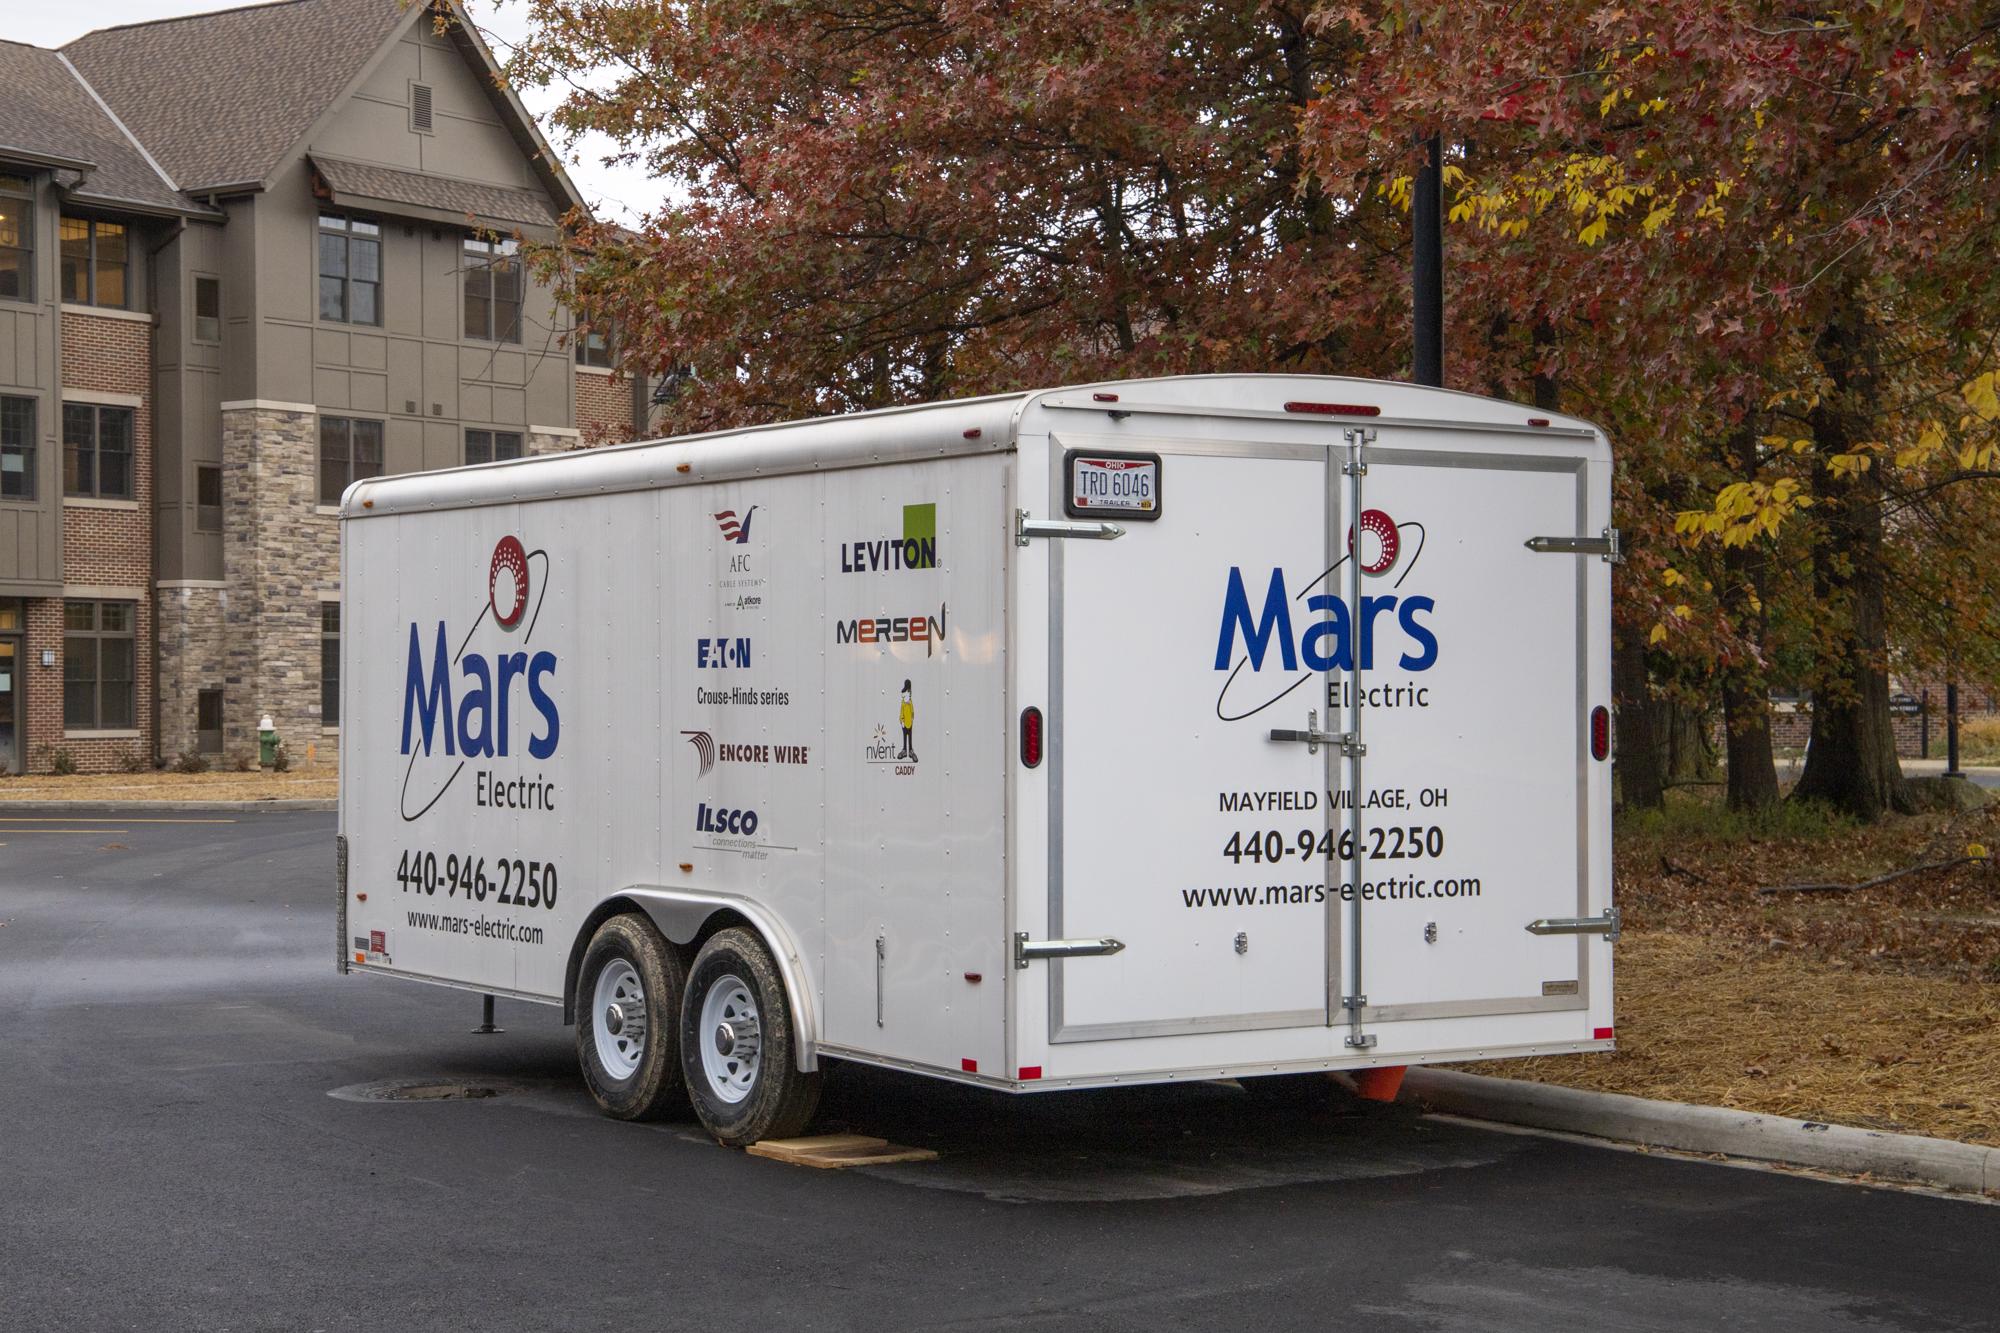 Mars Electric offers specially designed trailers and trucks for VMI delivery